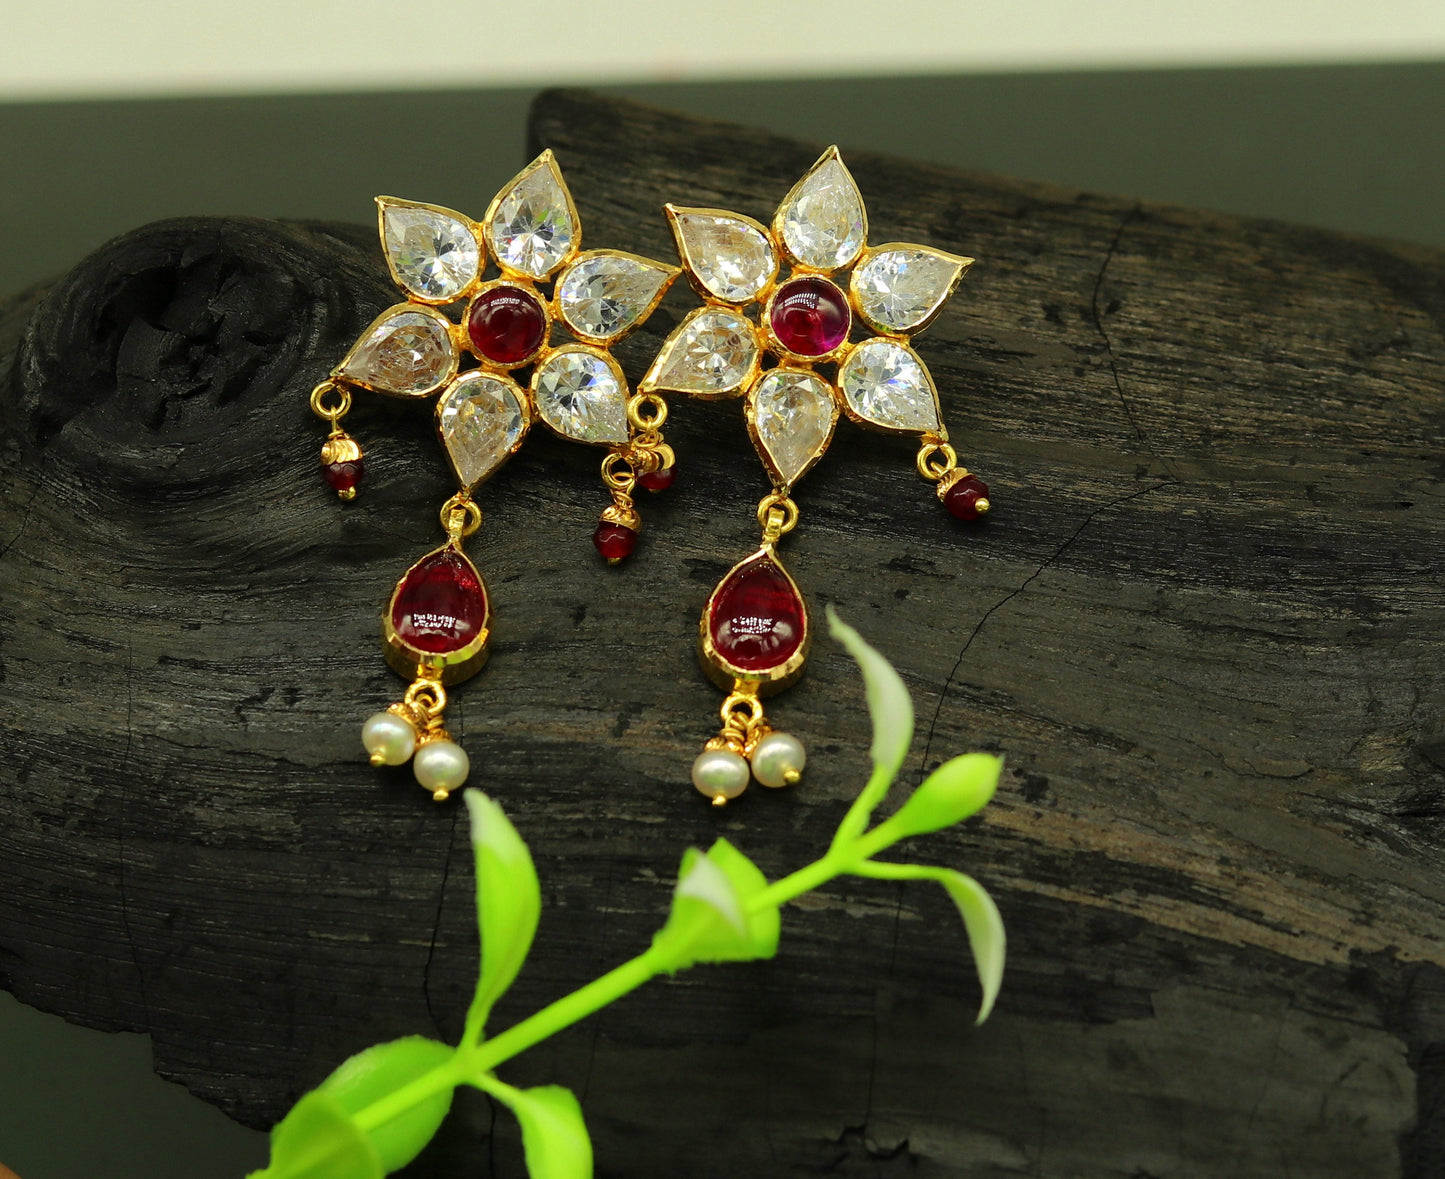 Vintage antique design handmade 22kt yellow gold stud earring bali, amazing customized bridesmaid gifting girl's jewelry from indai er127 - TRIBAL ORNAMENTS